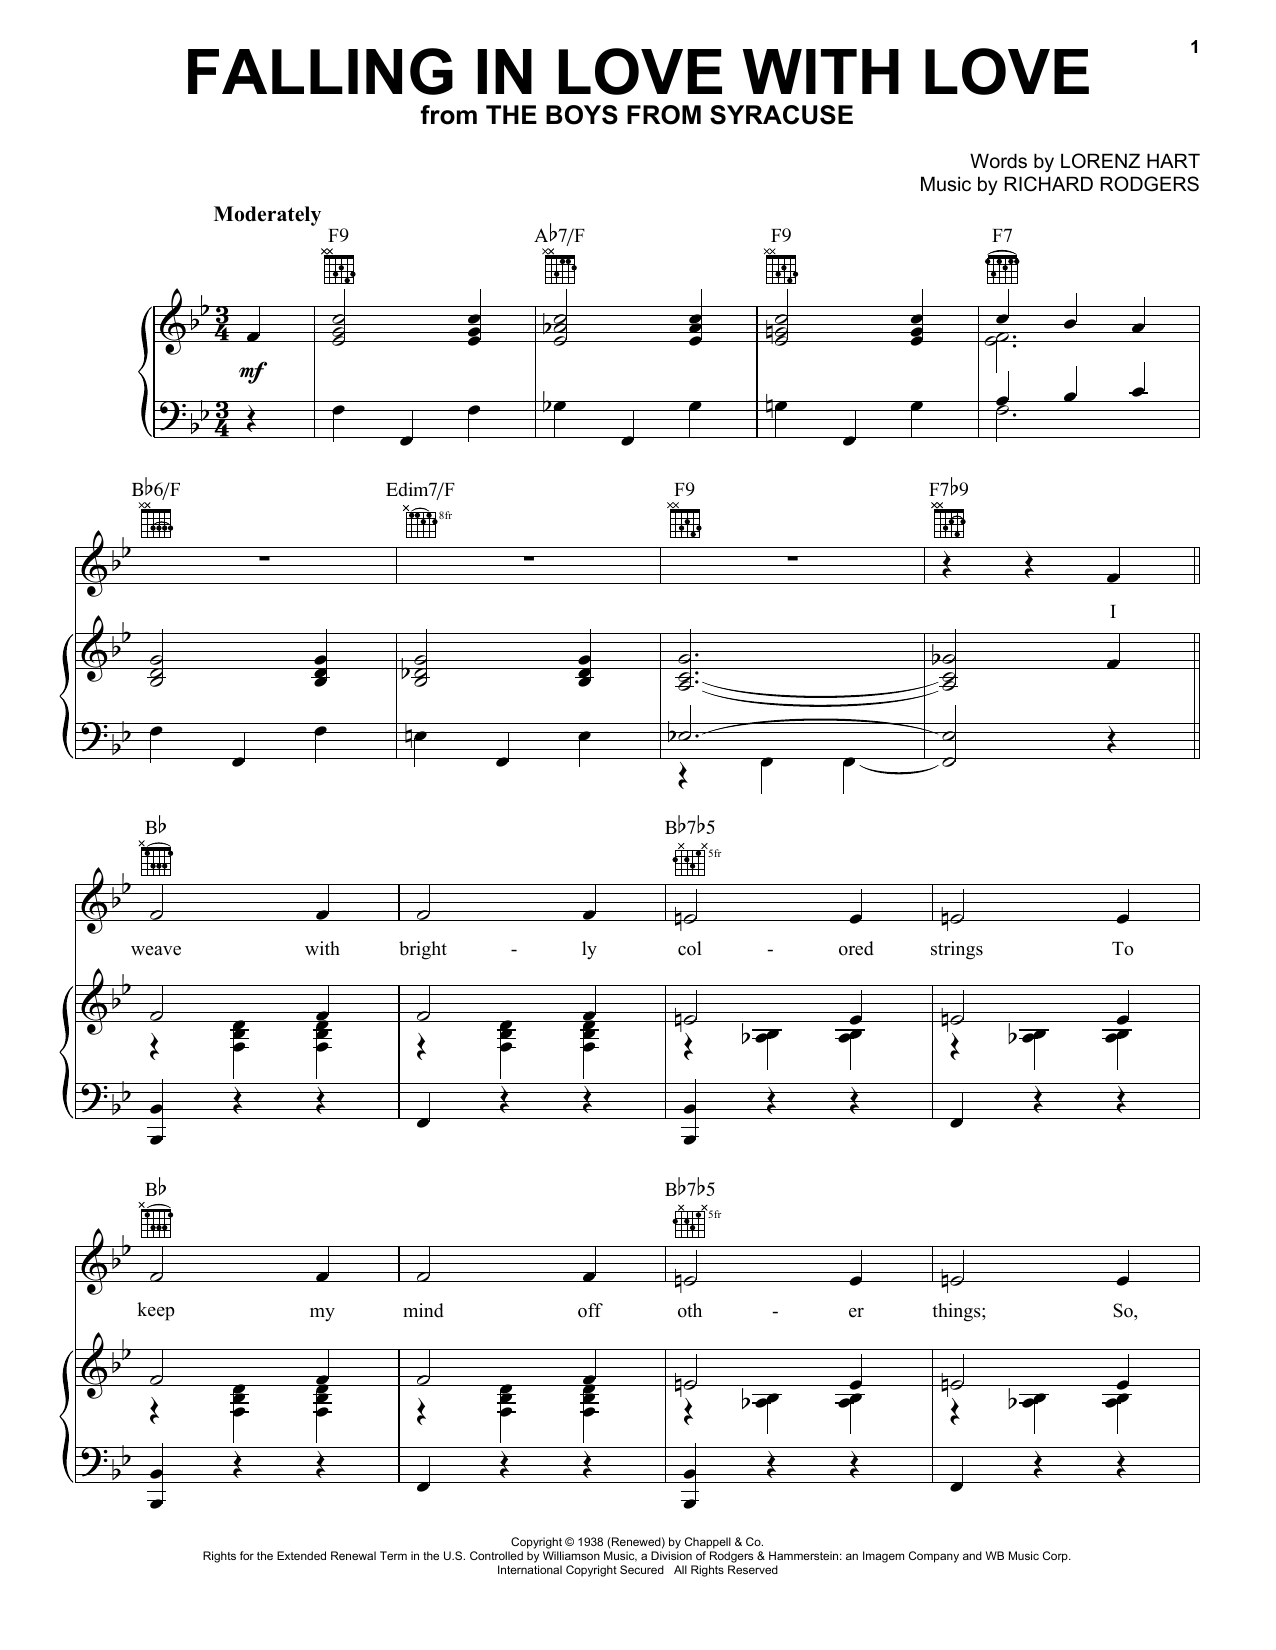 Rodgers & Hart Falling In Love With Love sheet music notes printable PDF score